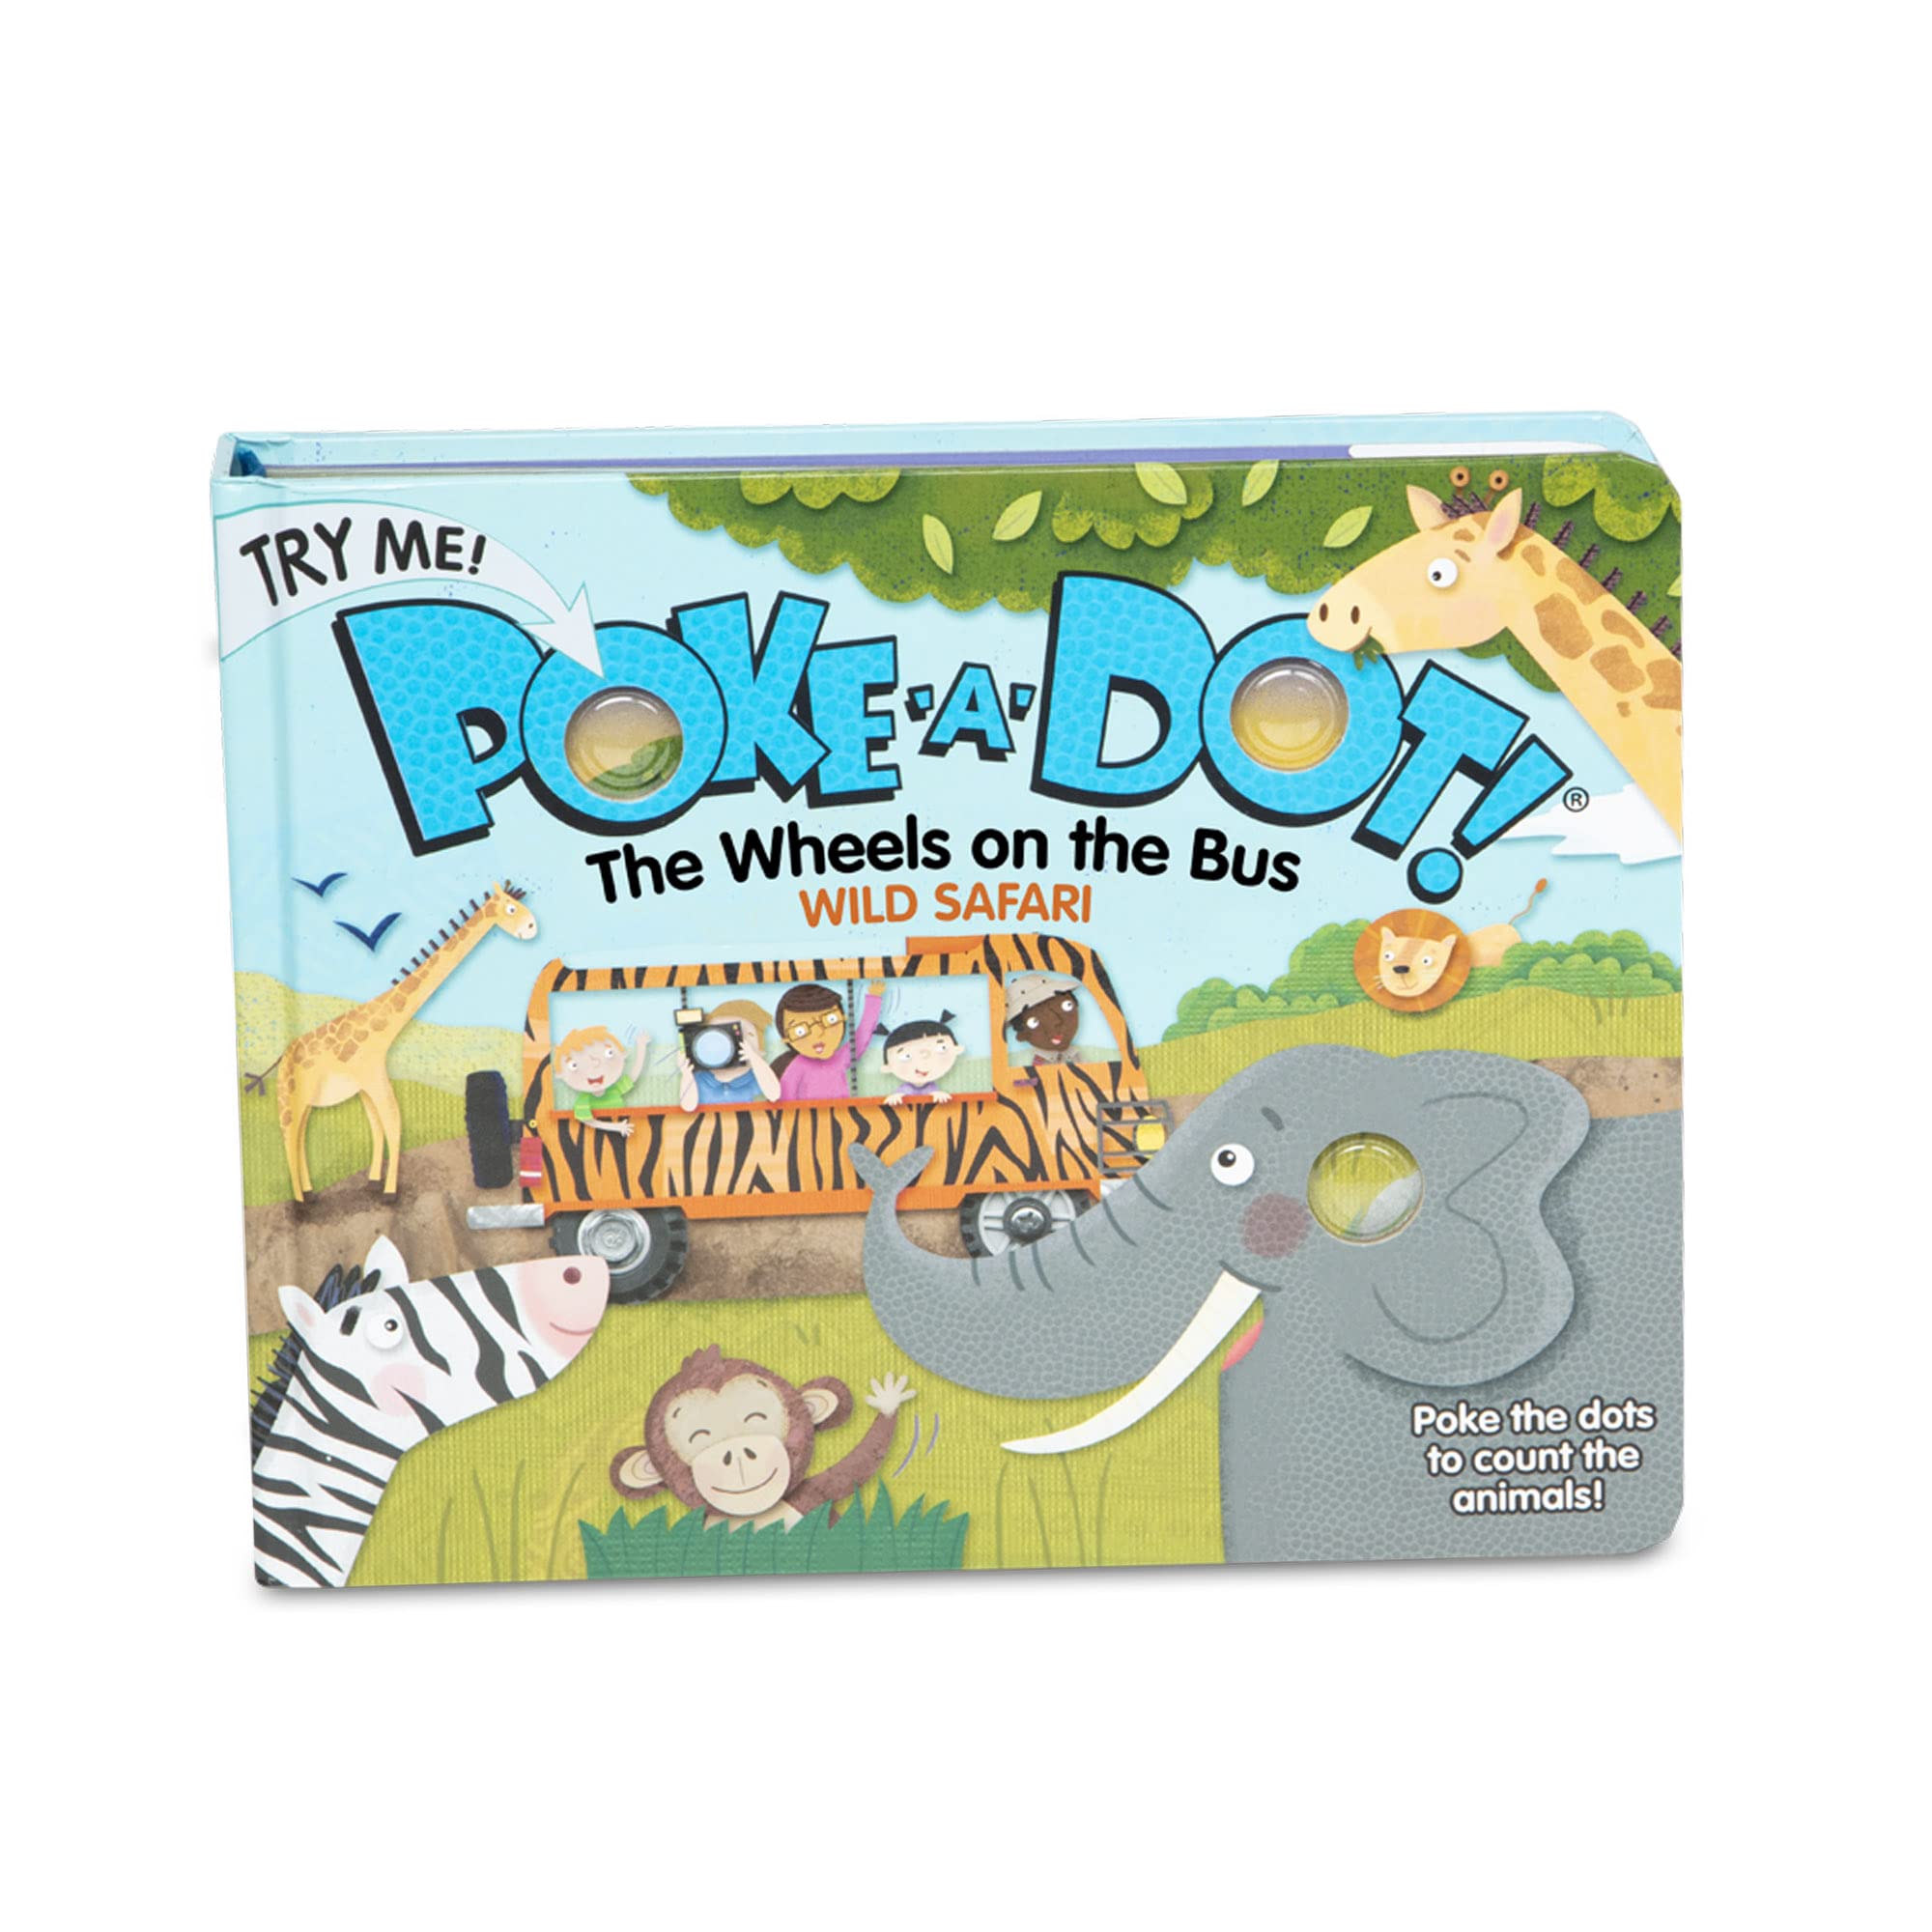 Melissa & Doug Children's Book - Poke-A-Dot: The Wheels on the Bus Wild Safari (Board Book with Buttons to Pop)